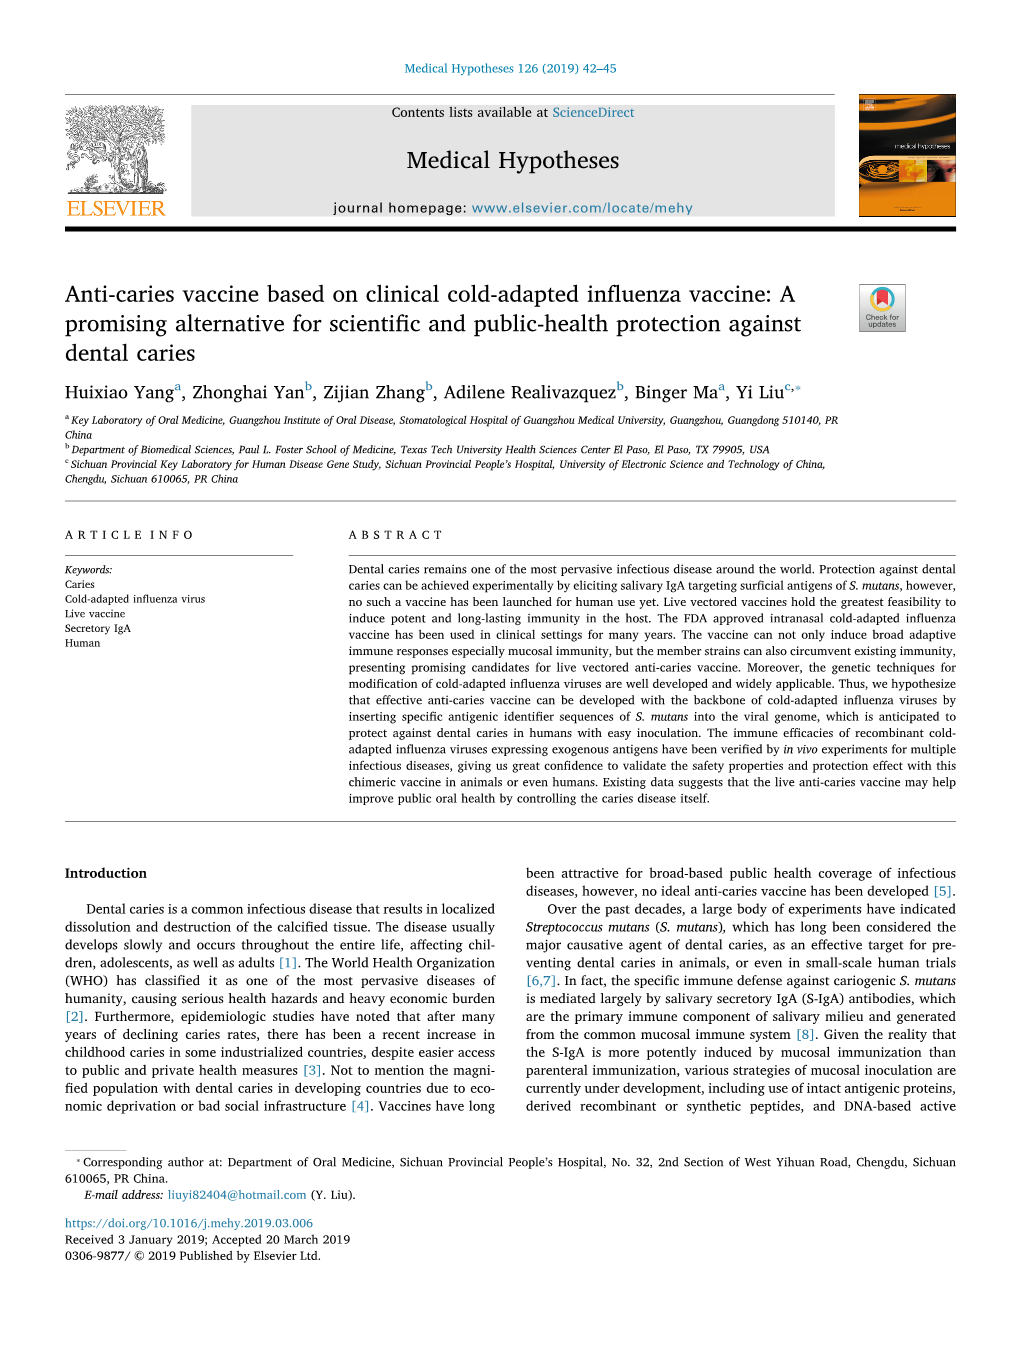 Anti-Caries Vaccine Based on Clinical Cold-Adapted Influenza Vaccine a Promising Alternative for Scientific and Public-Health P